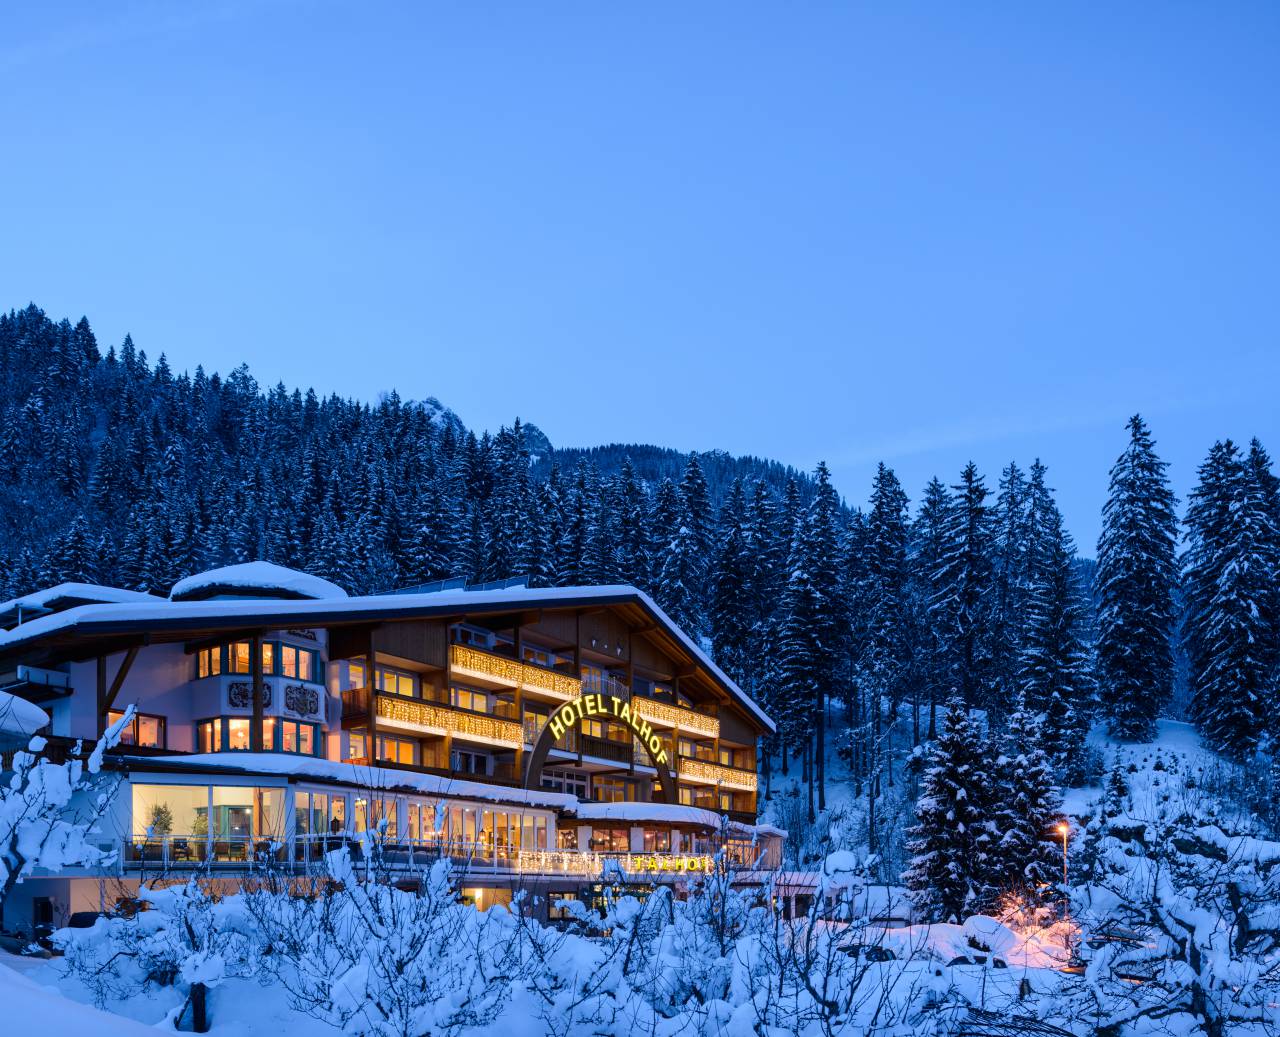 Snowy panorama hotel Talhof in the forest in the mountains at dusk